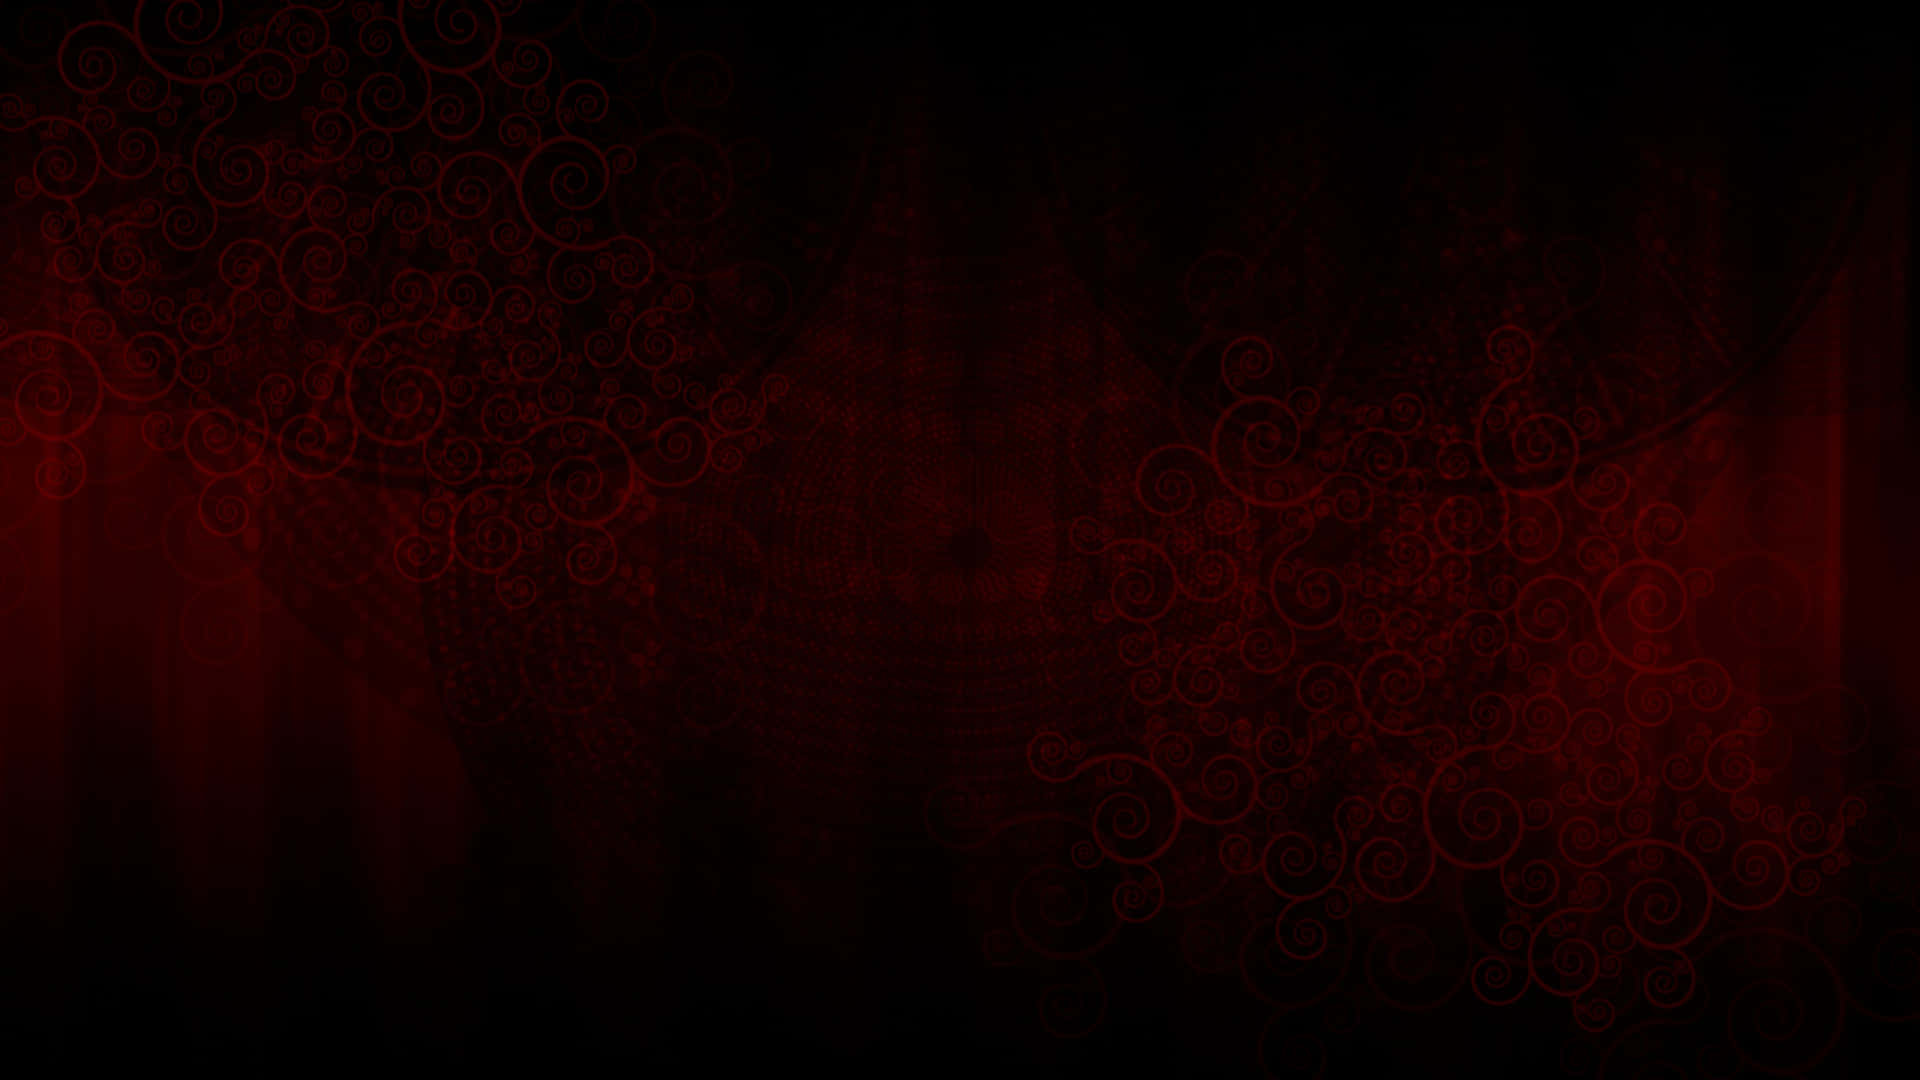 Aesthetic Black And Red Texture Background